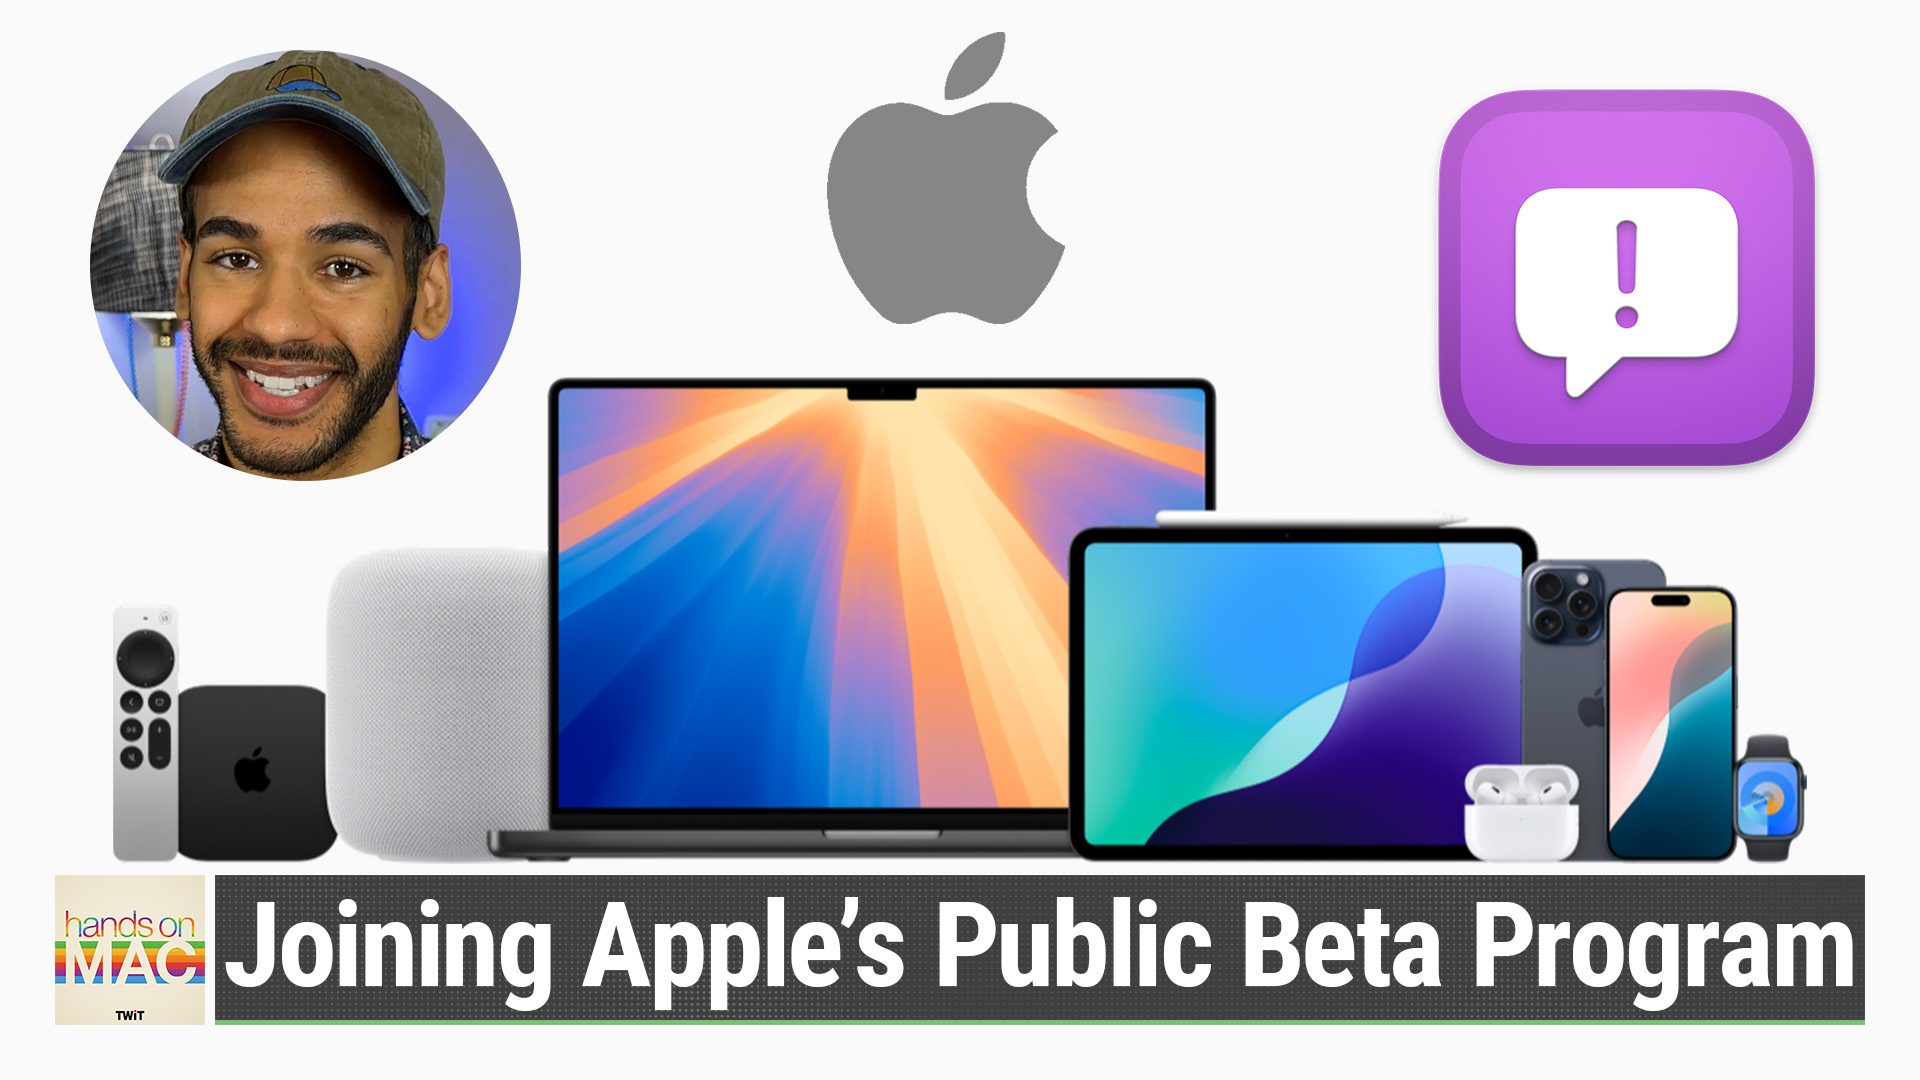 How To Join the Apple Public Beta Program (Hands-On Mac #141)